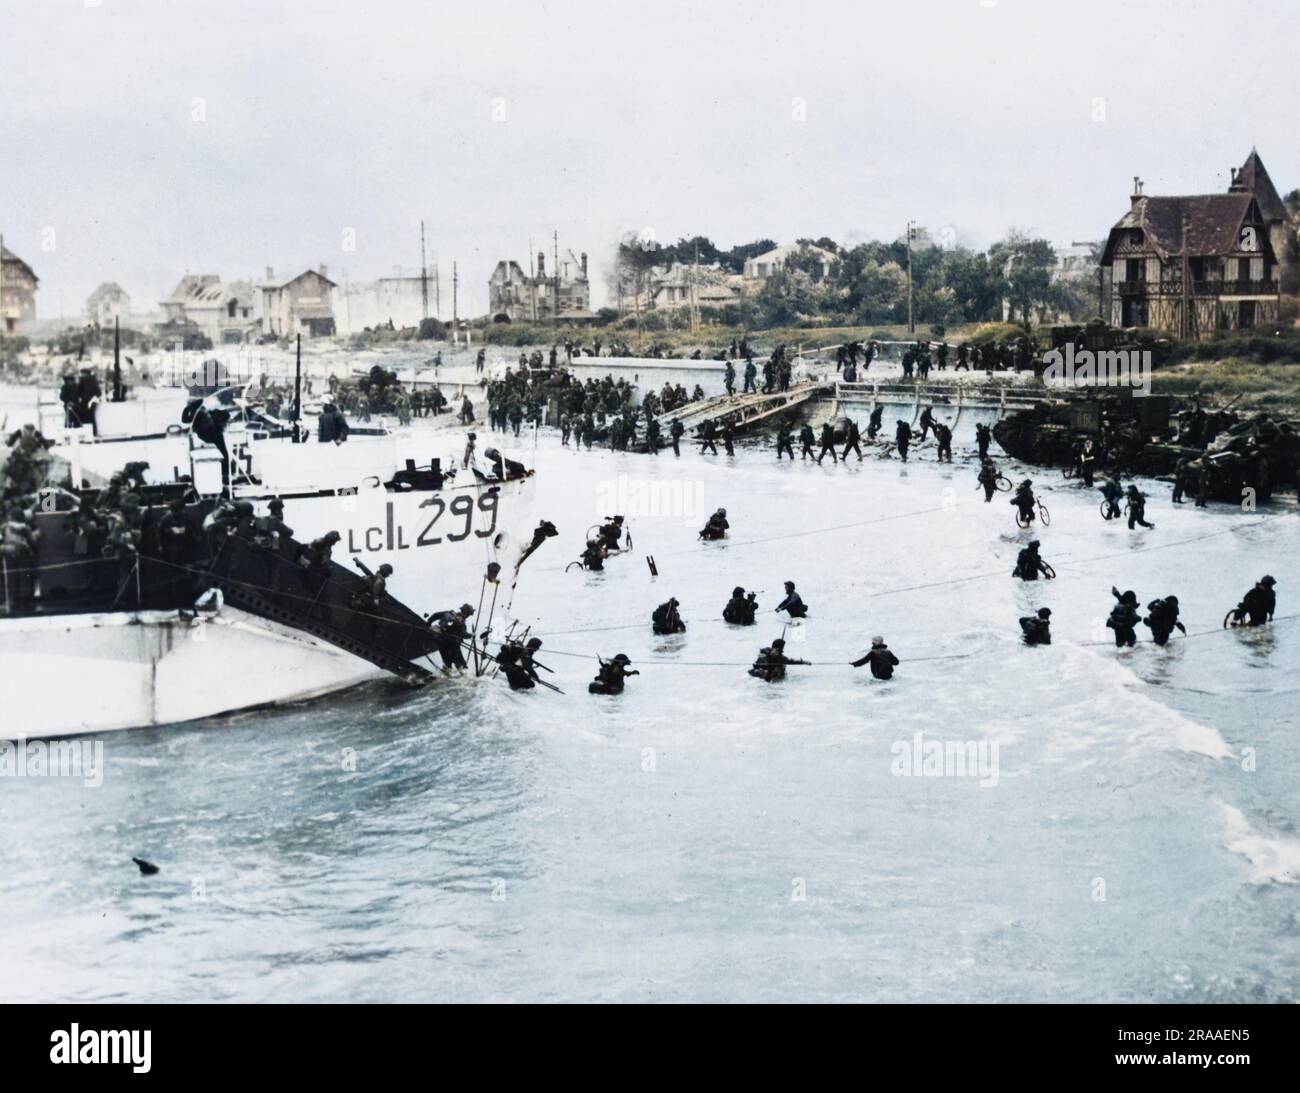 British and Canadian 3rd Division troops land at Juno Beach. D-Day began on June 6th, 1944 at 6:30am and was conducted in two assault phases û the air assault landing of allied troops followed by an amphibious assault by infantry. The Normandy landings were the largest single-day amphibious actions ever undertaken, involving close to 400,000 military and naval personnel.     Date: 6th June 1944 Stock Photo